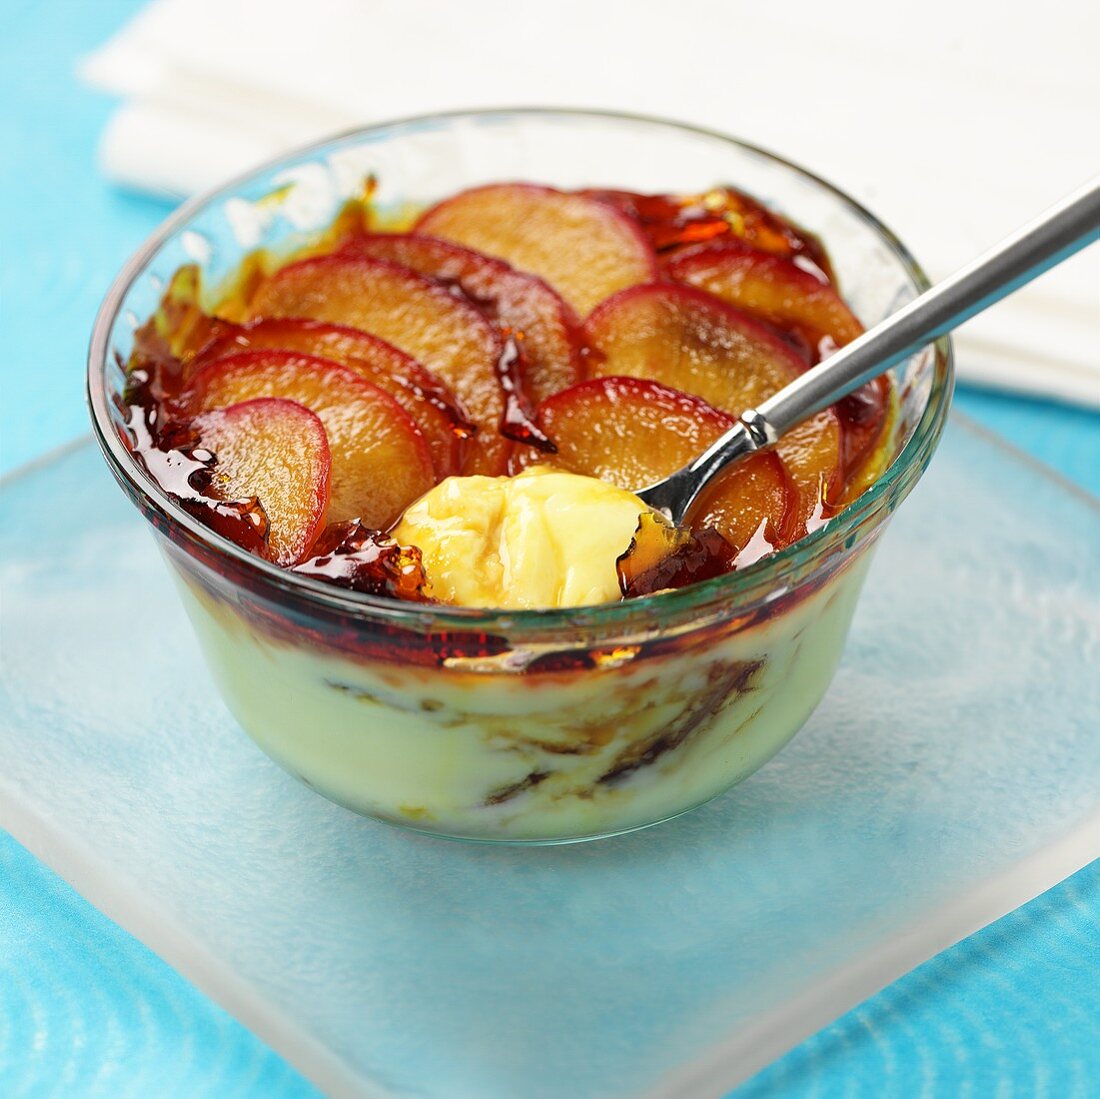 Cream dessert topped with plums